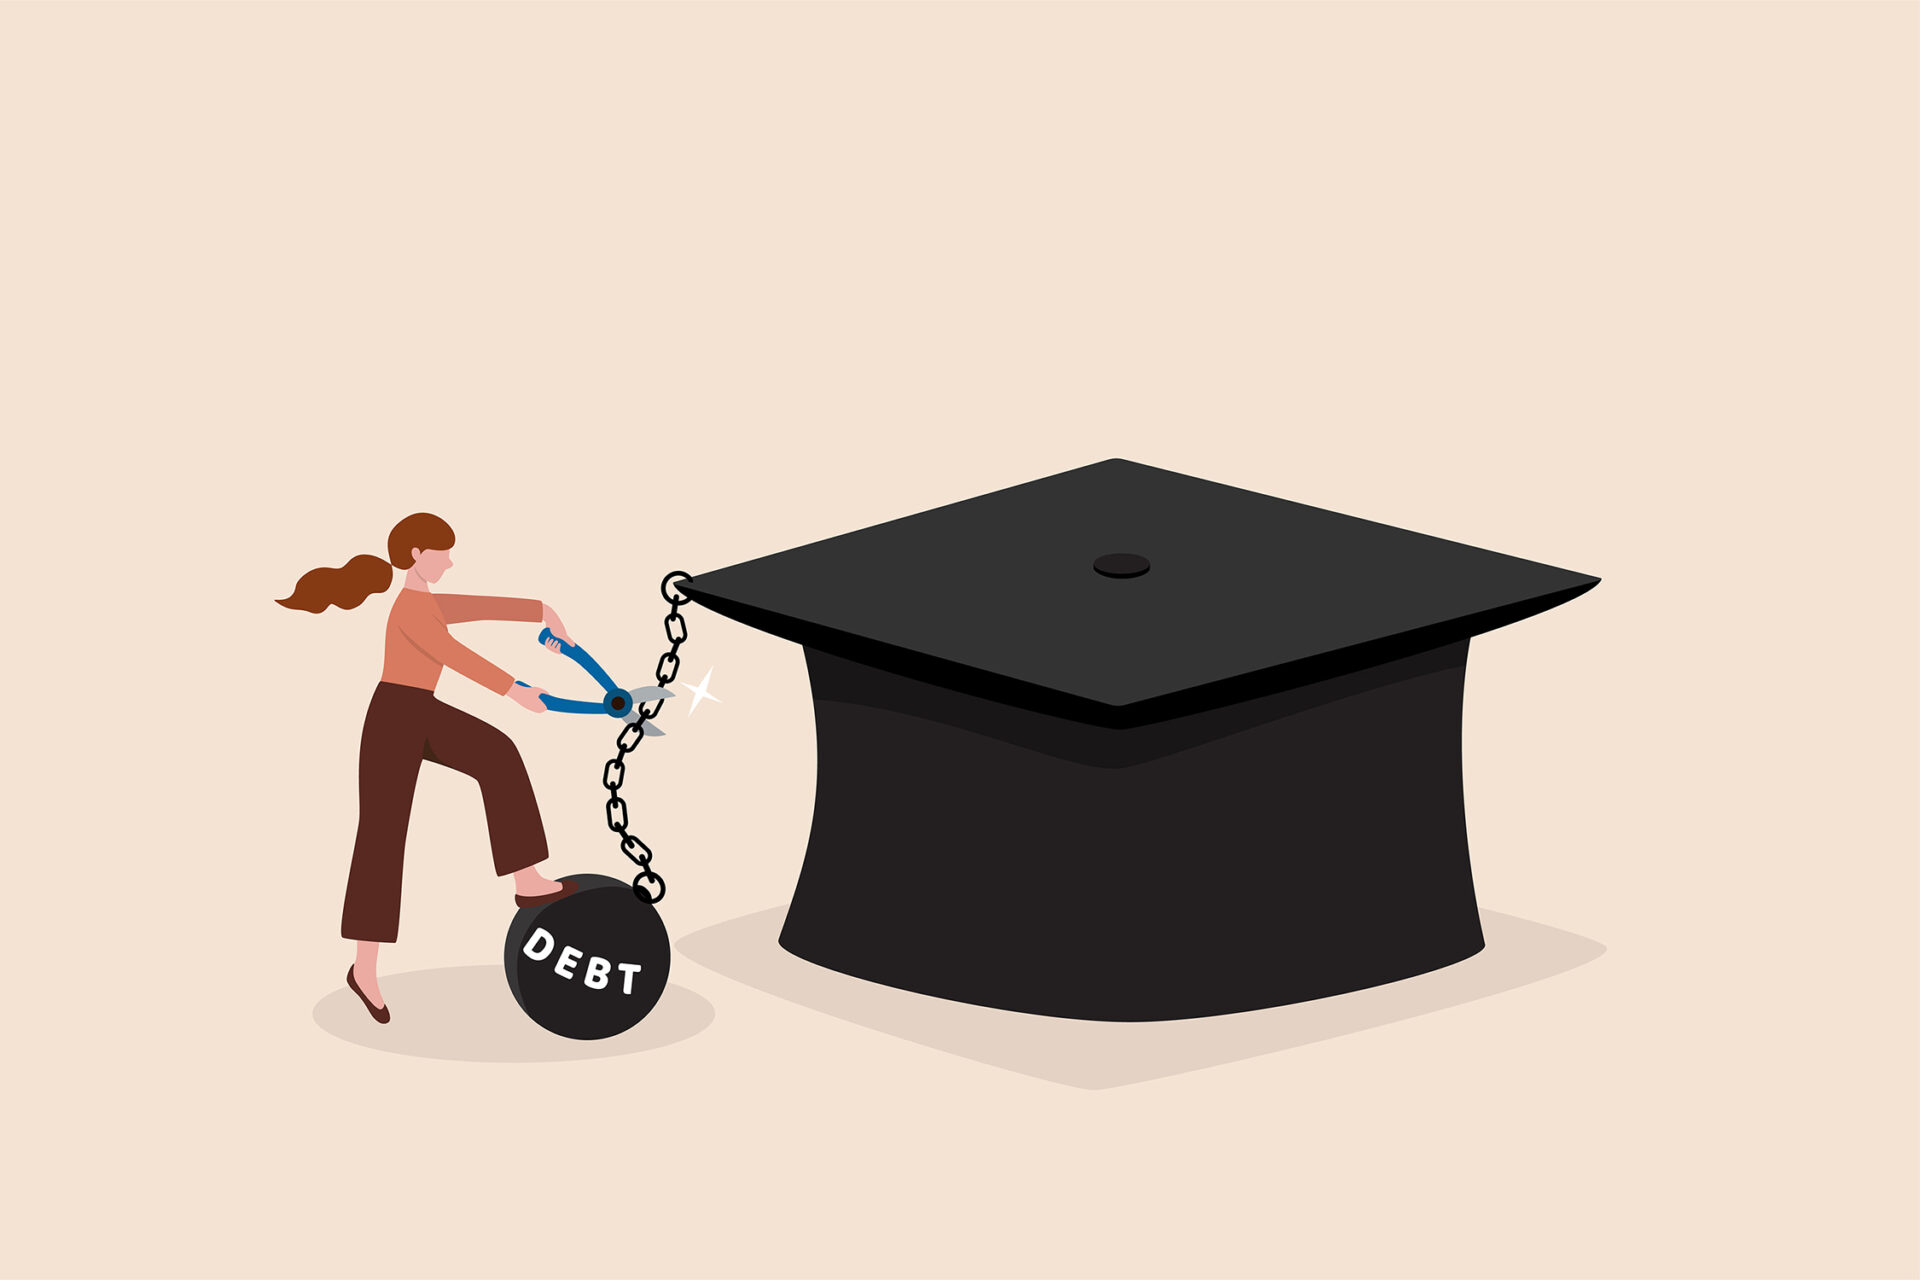 Illustration of young adult woman cutting a chain to obtain relief from student loan debt burden metal ball from graduation mortarboard